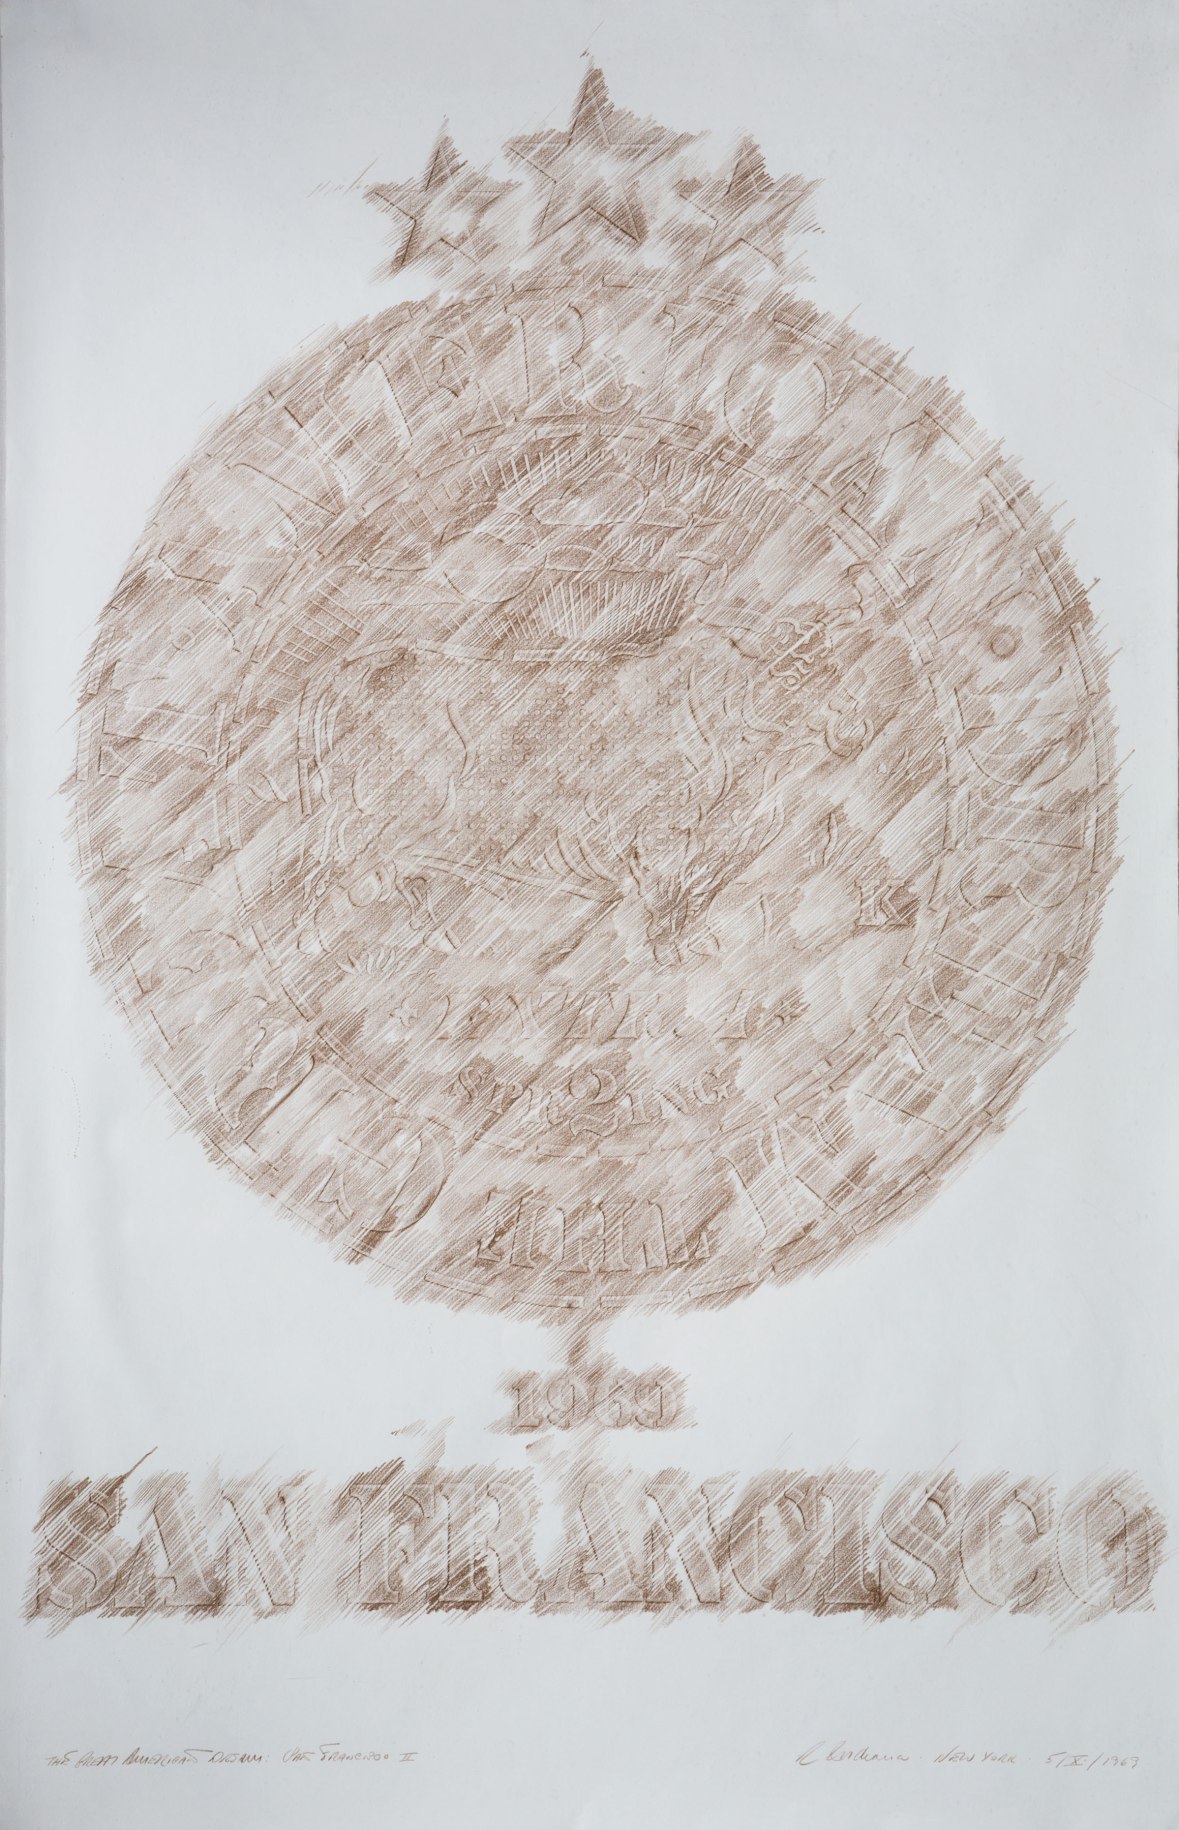 A 40 by 26 inch conte crayon on paper rubbing. A circle with the text The Great American Dream in the outer ring contains image of a steer. Above the circle are three stars, and below the circle the year 1969 and San Francisco.